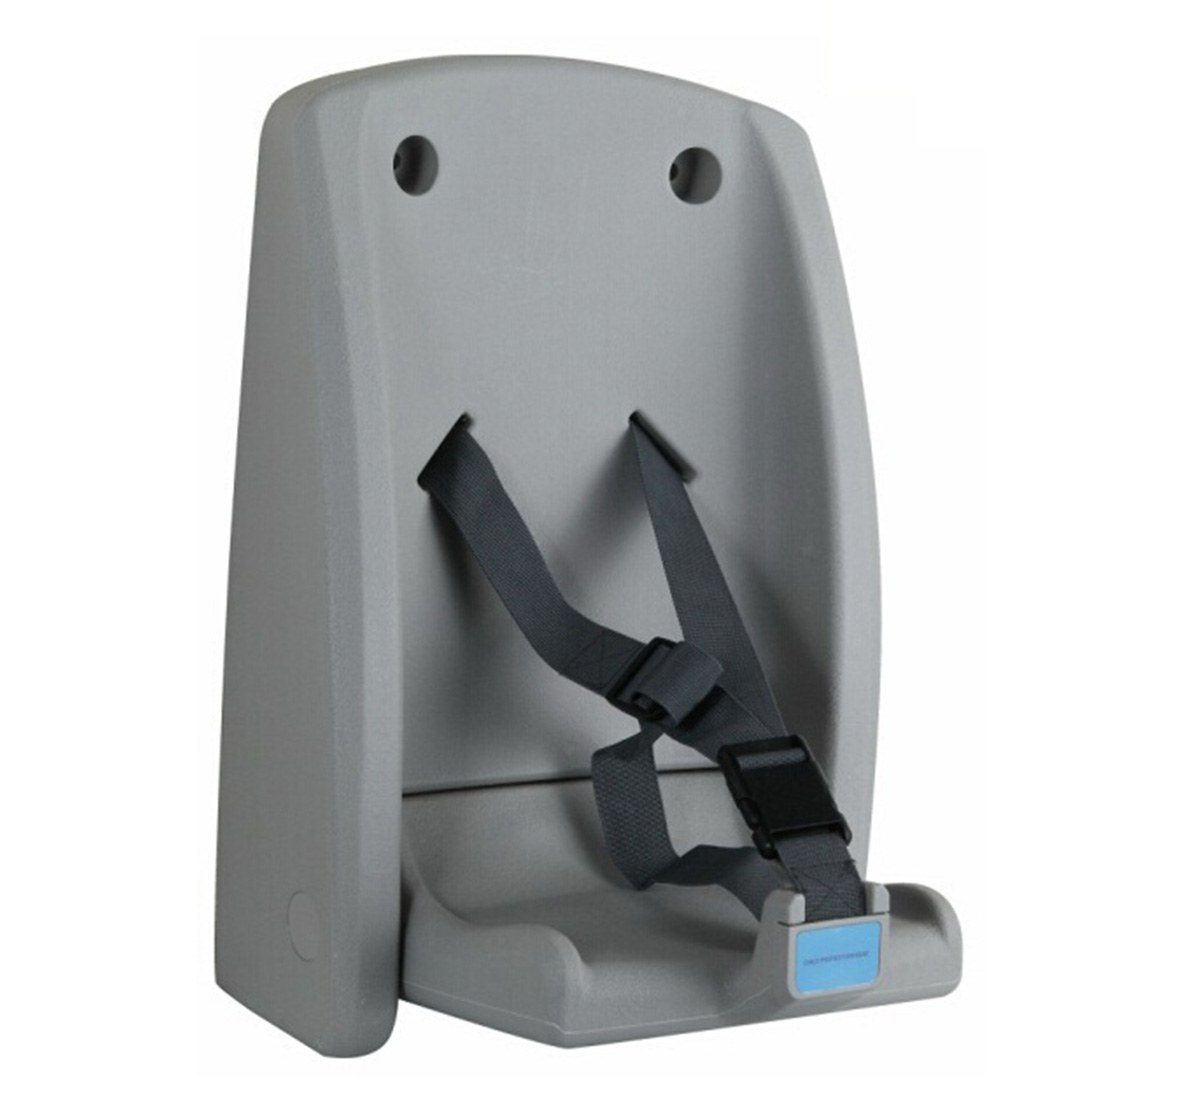 Gray baby safety seat 20kg capacity